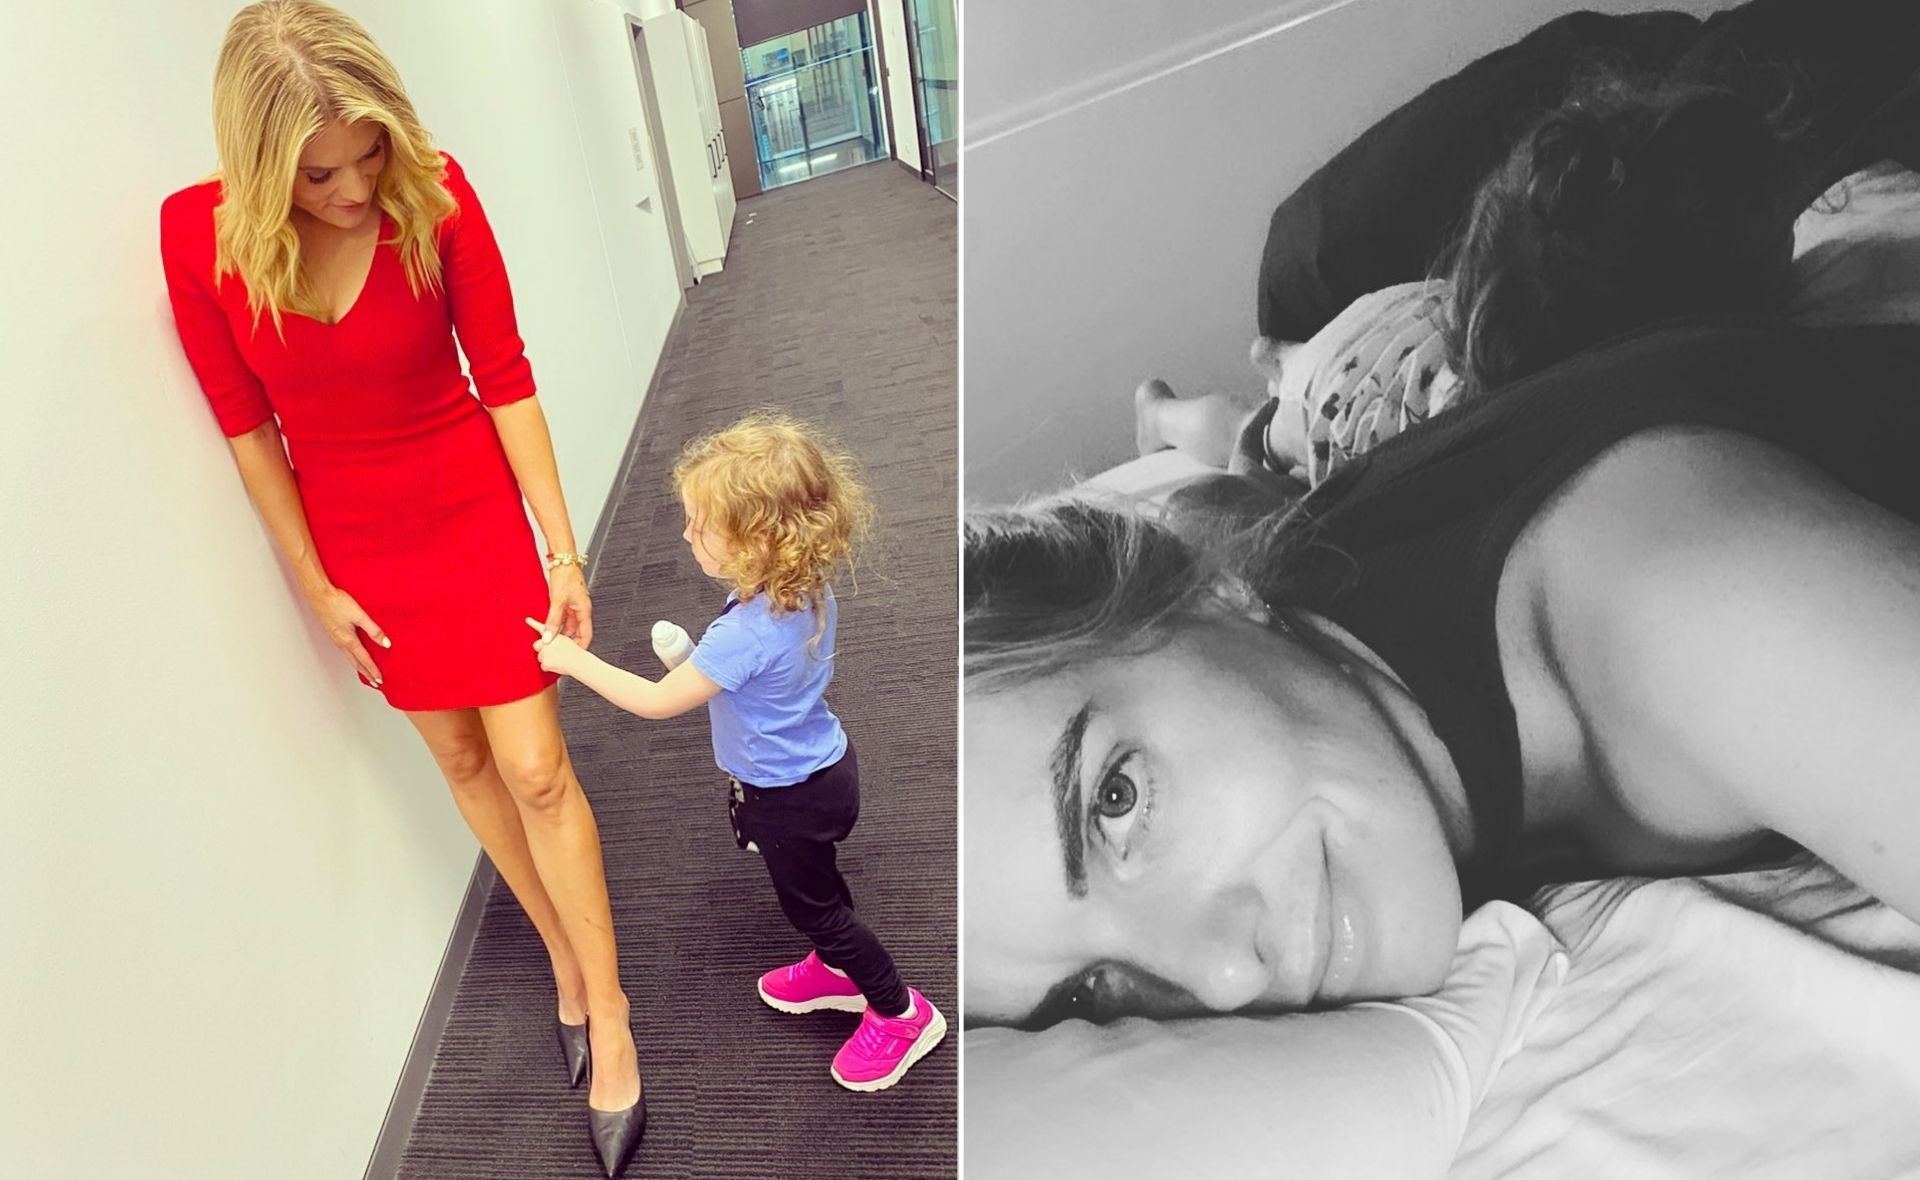 Erin Molan and her mini-me daughter Eliza cutest moments together